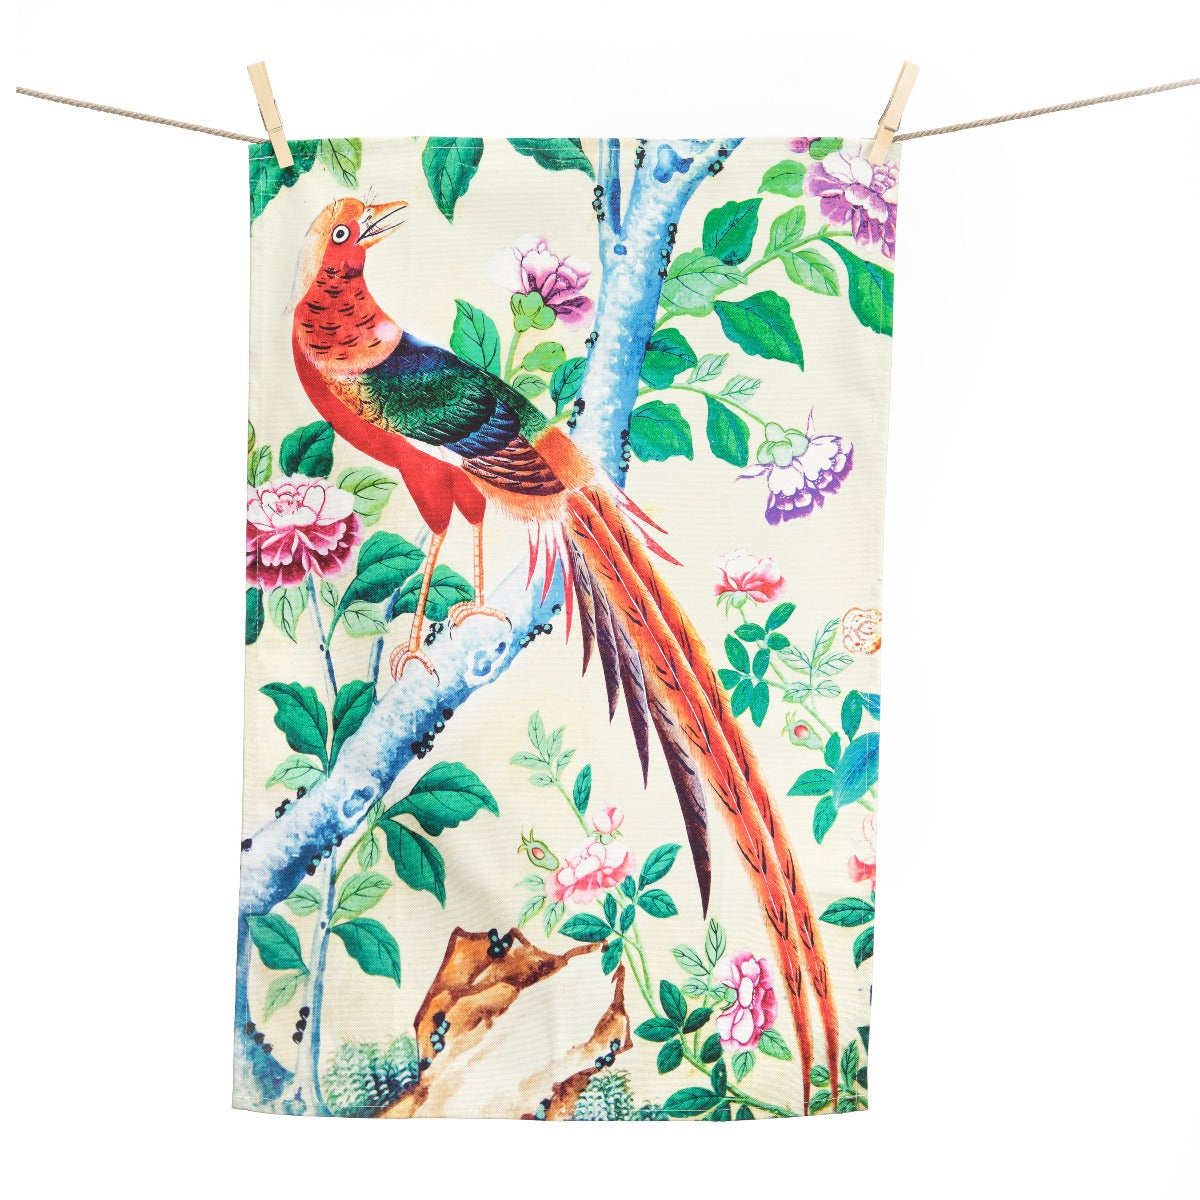 A tea towel hanging on a washing line. The design features a large pheasant perched on a tree branch surrounded by flowers and leaves..